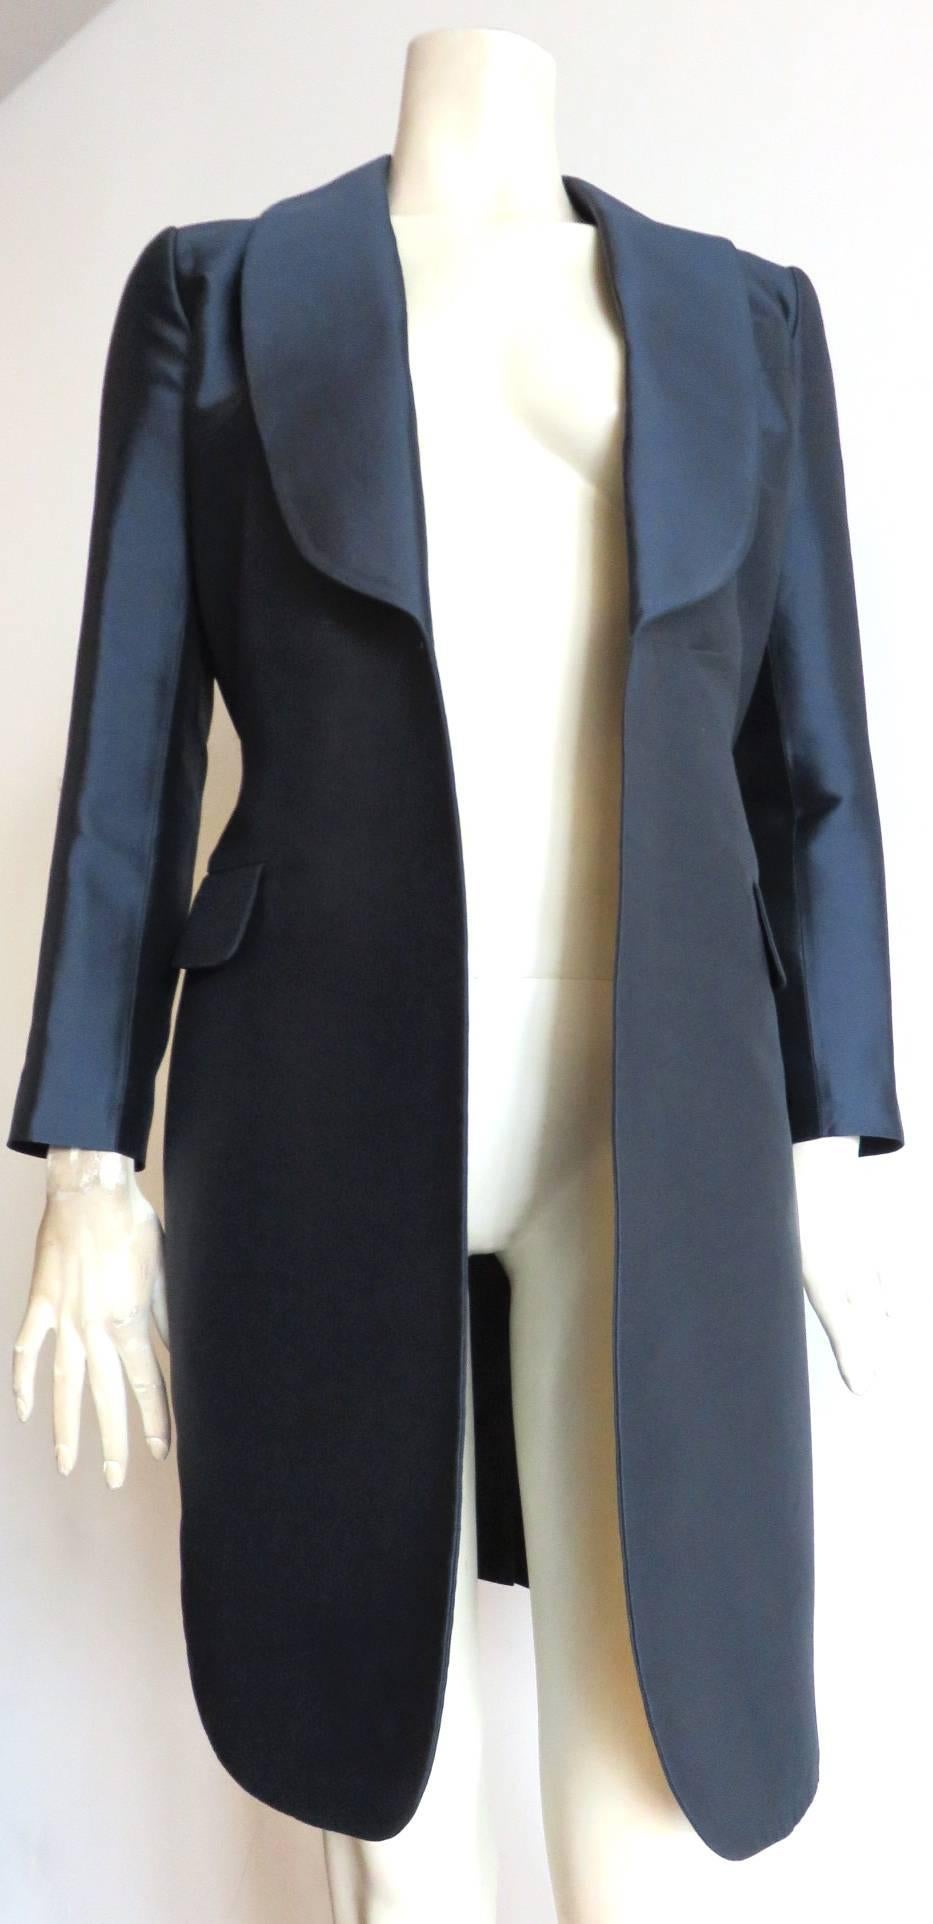 LOUIS VUITTON Silk satin evening coat with dress-style back.

This amazing coat features a menswear, tuxedo-inspired, shawl lapel at the front, and darted, dress-style waist with logo zipper the back.

Closure-less, open-front design at the